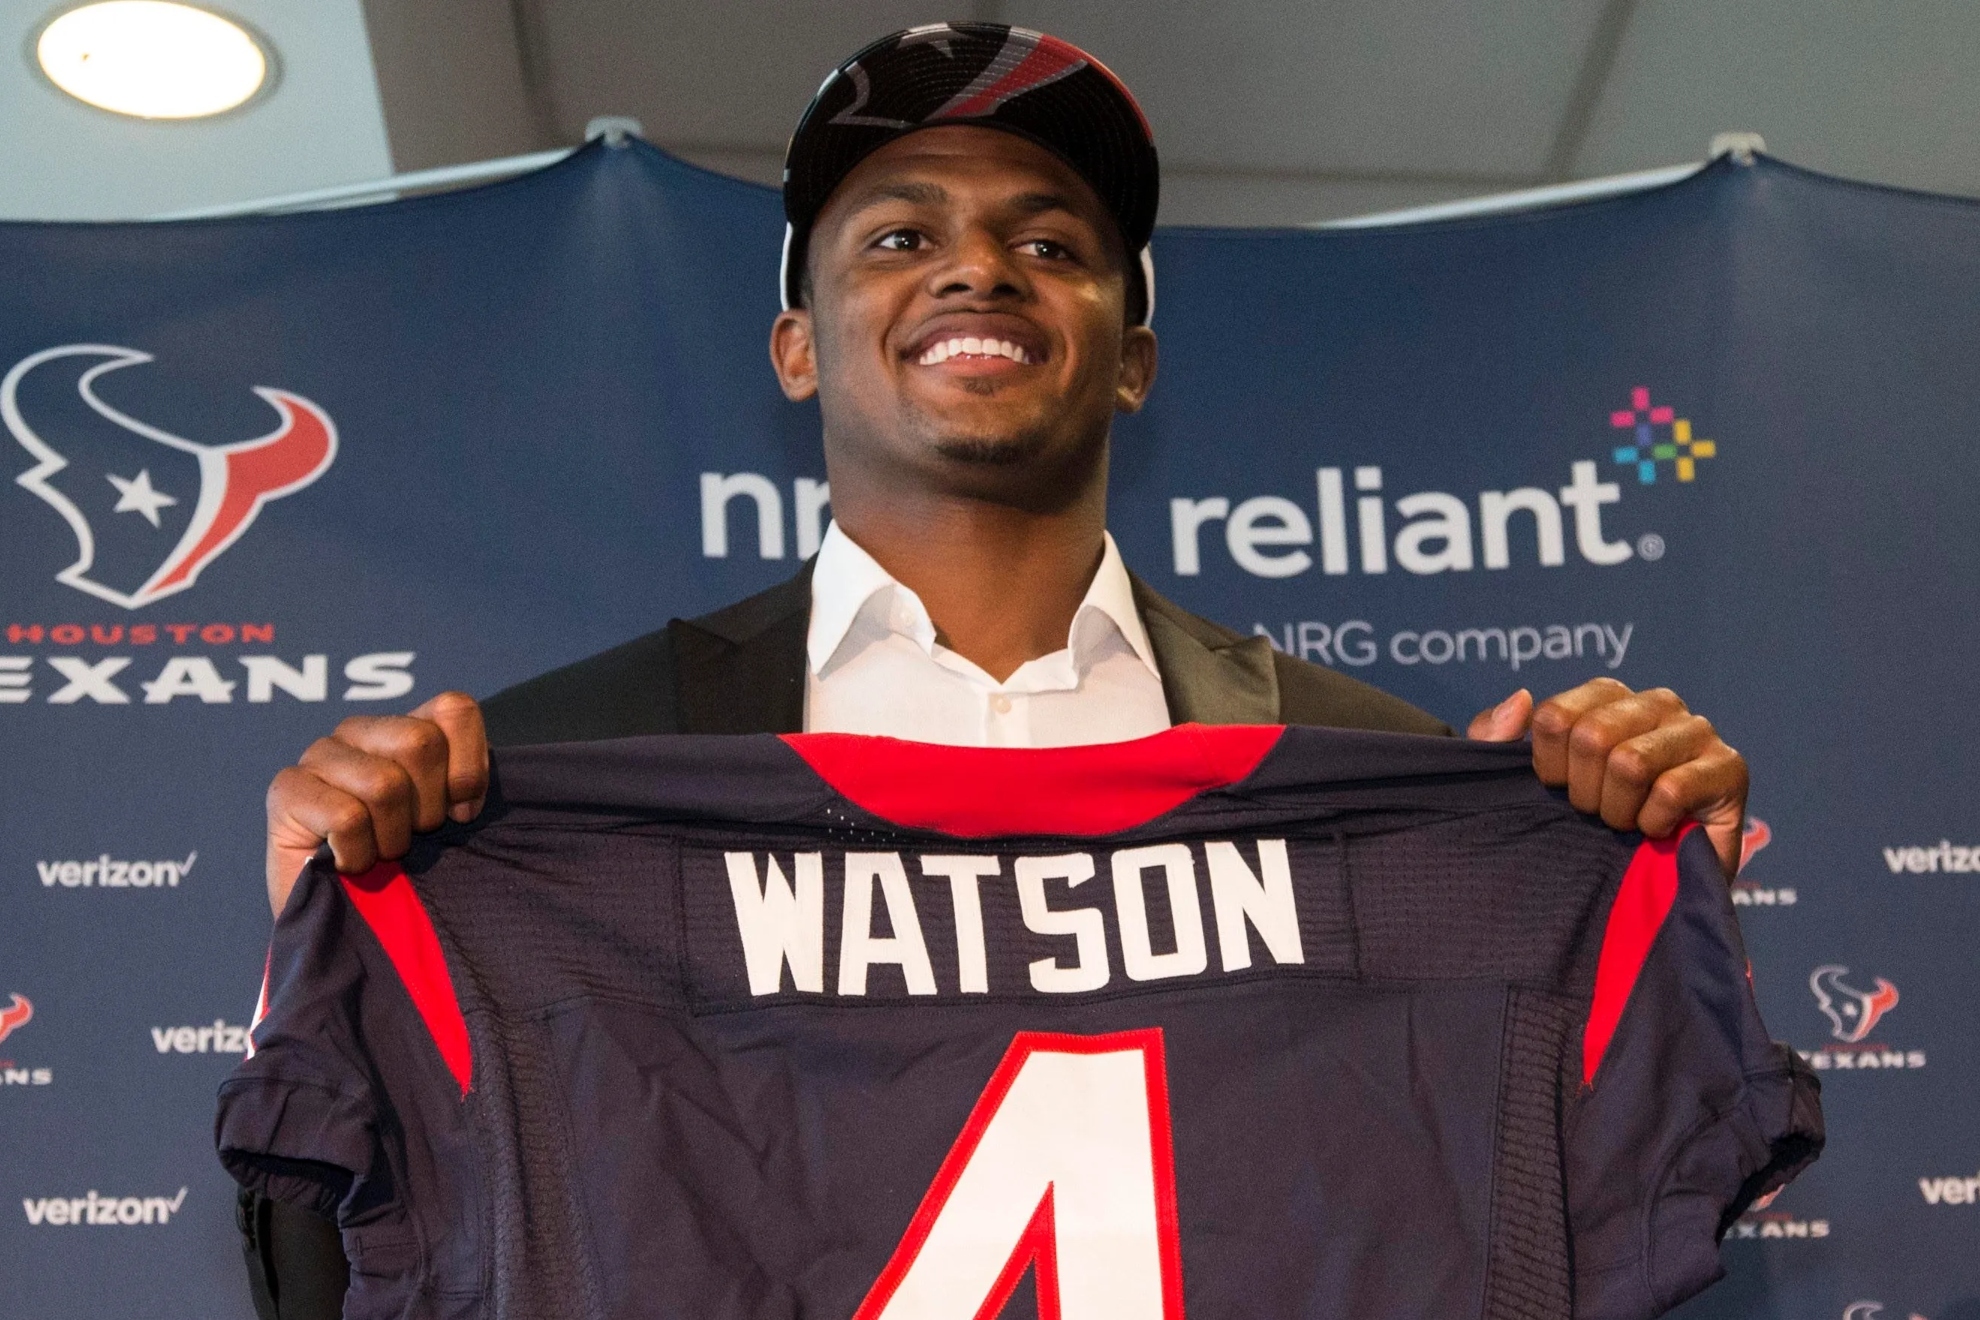 Time to trade the Watson jersey